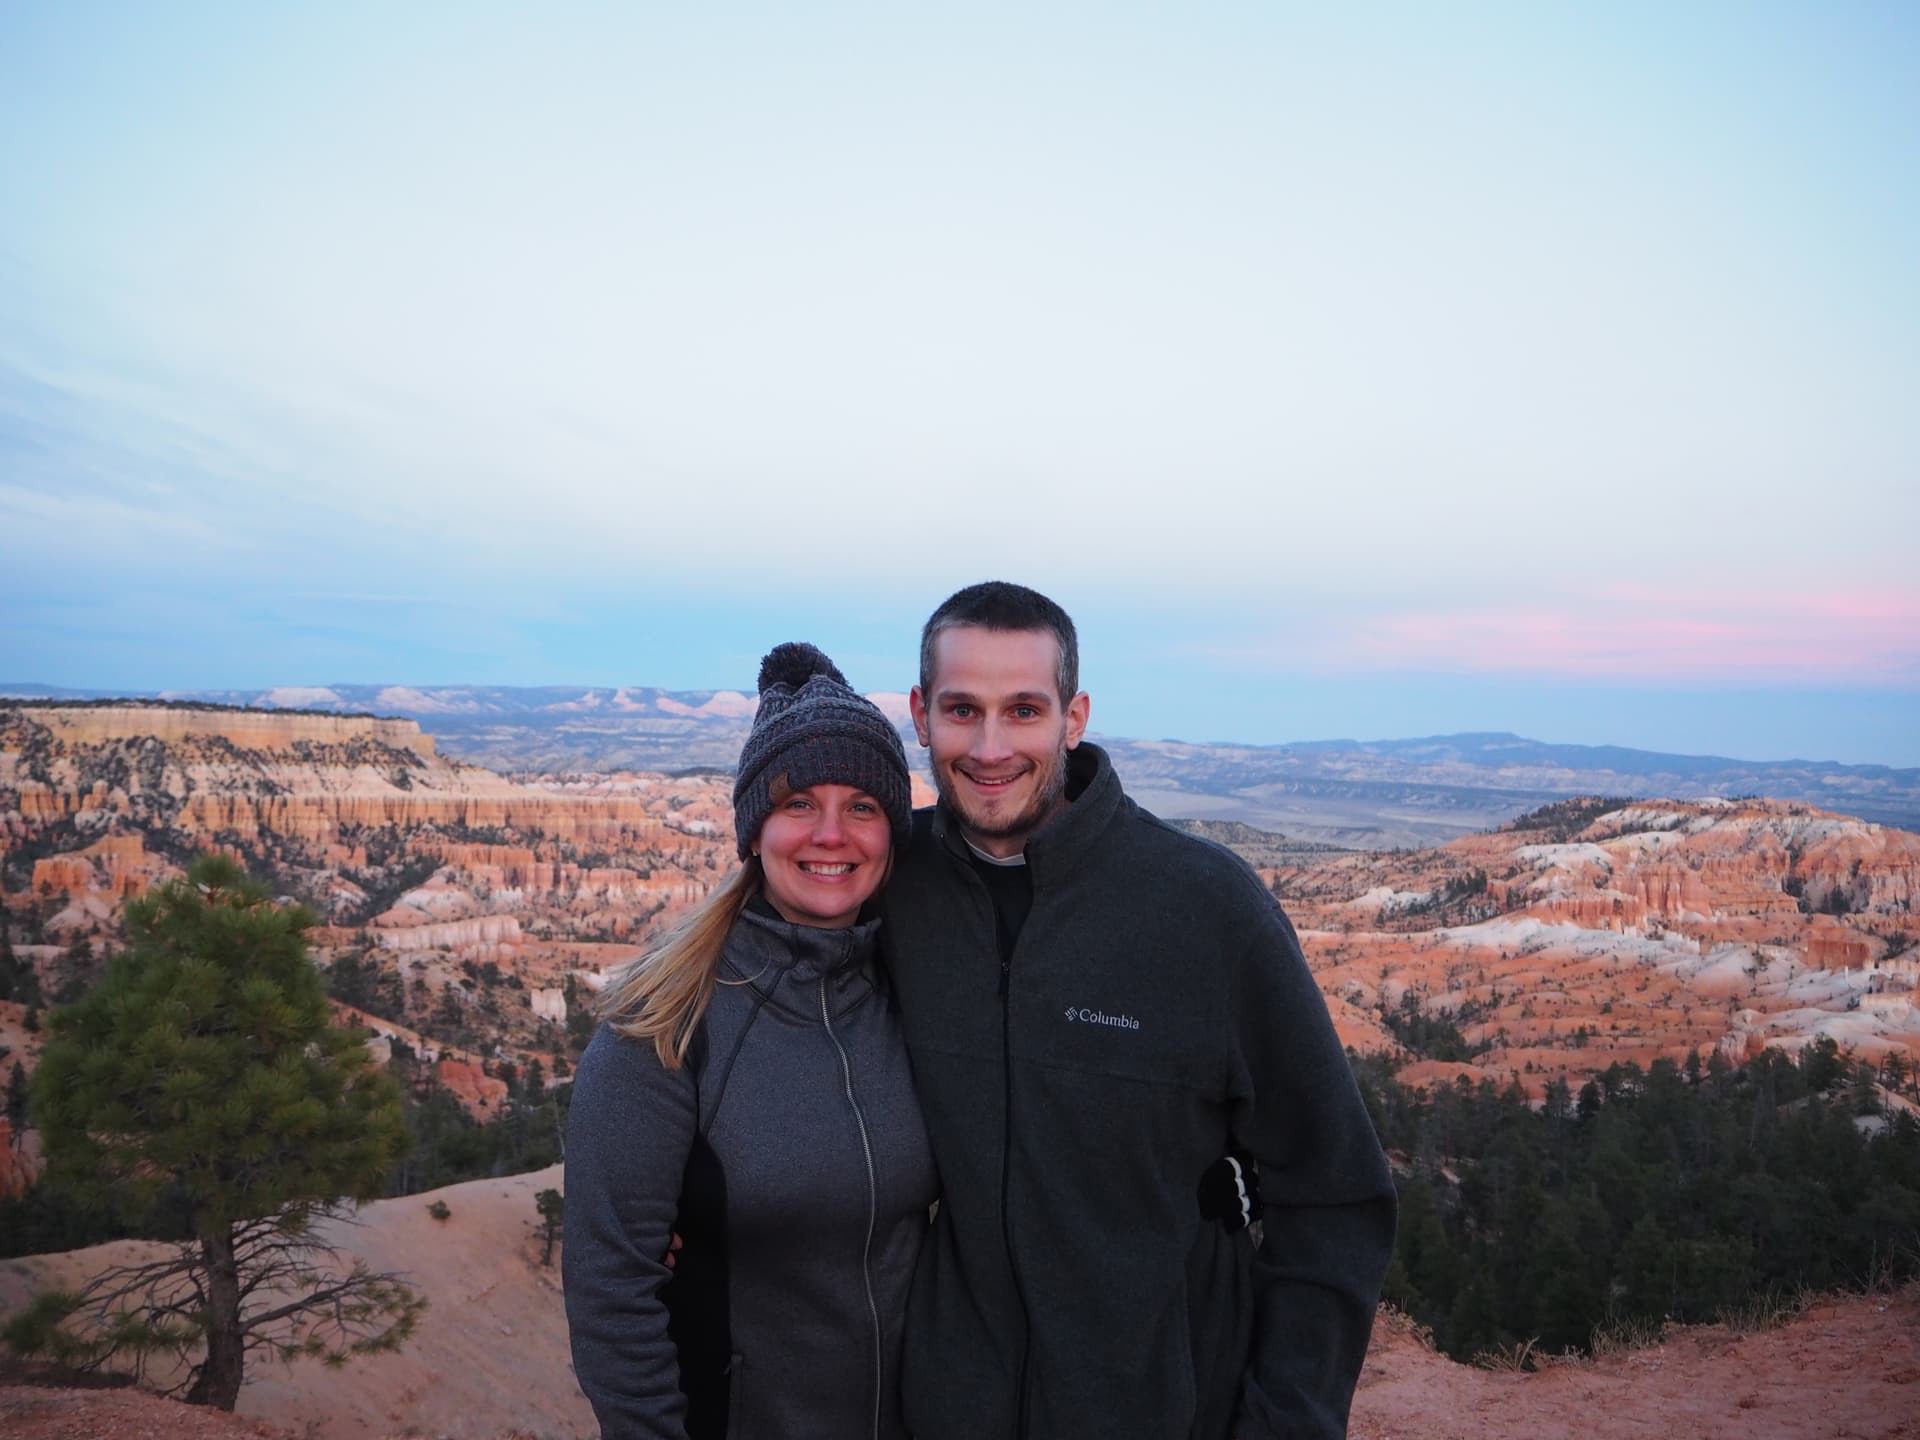 Keith and Lindsey preparing for the full moon hike at Bryce Canyon National Park